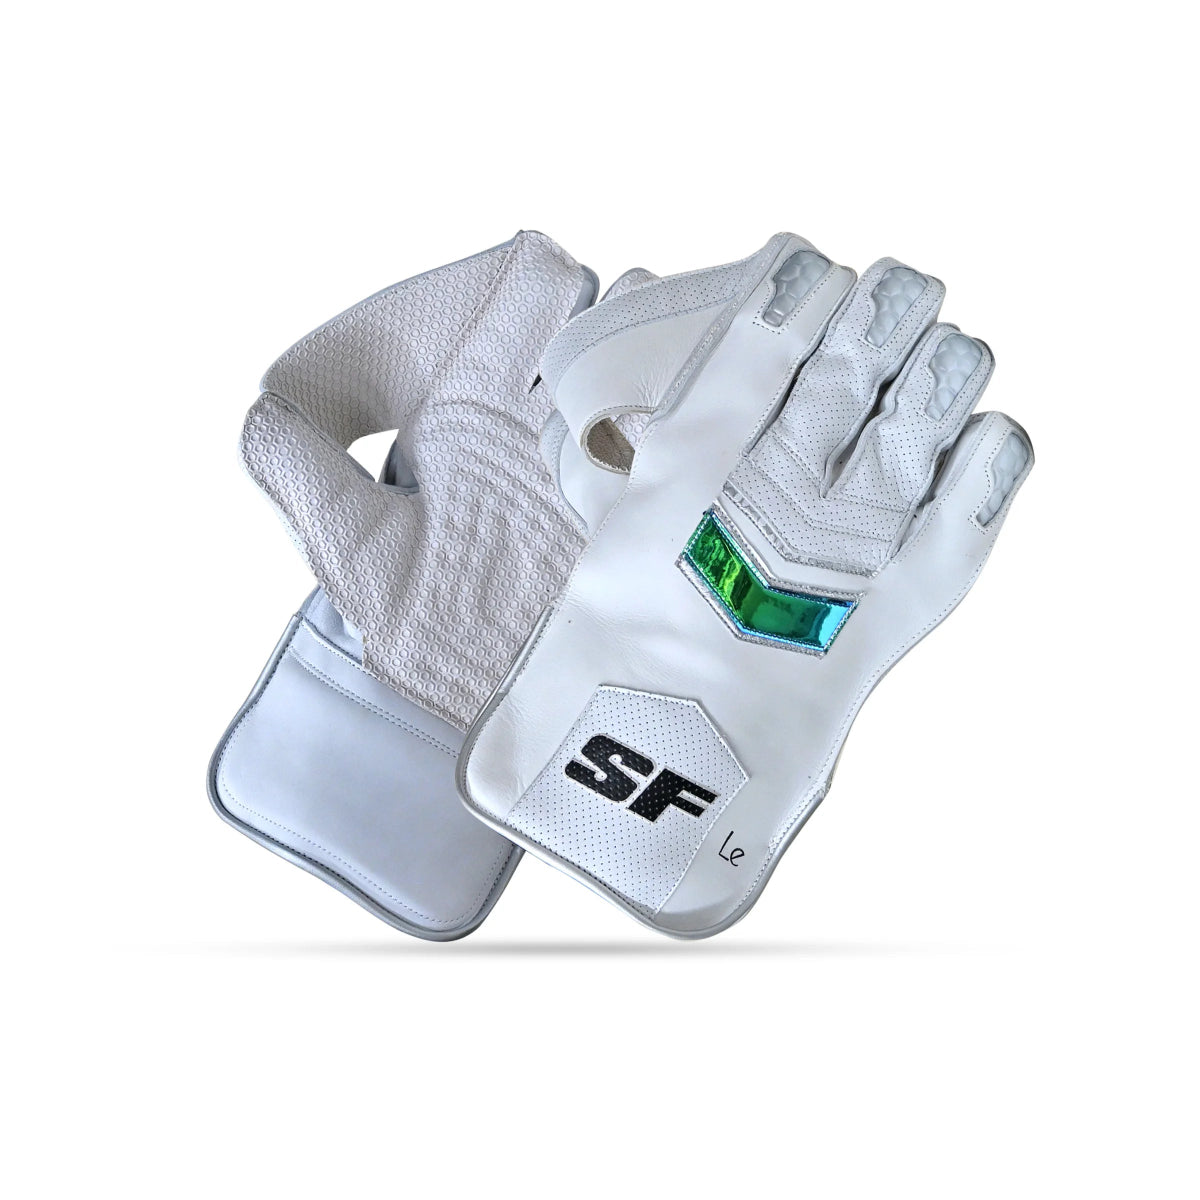 SF Limited Edition Cricket Wicket Keeping Gloves - Acrux Sports